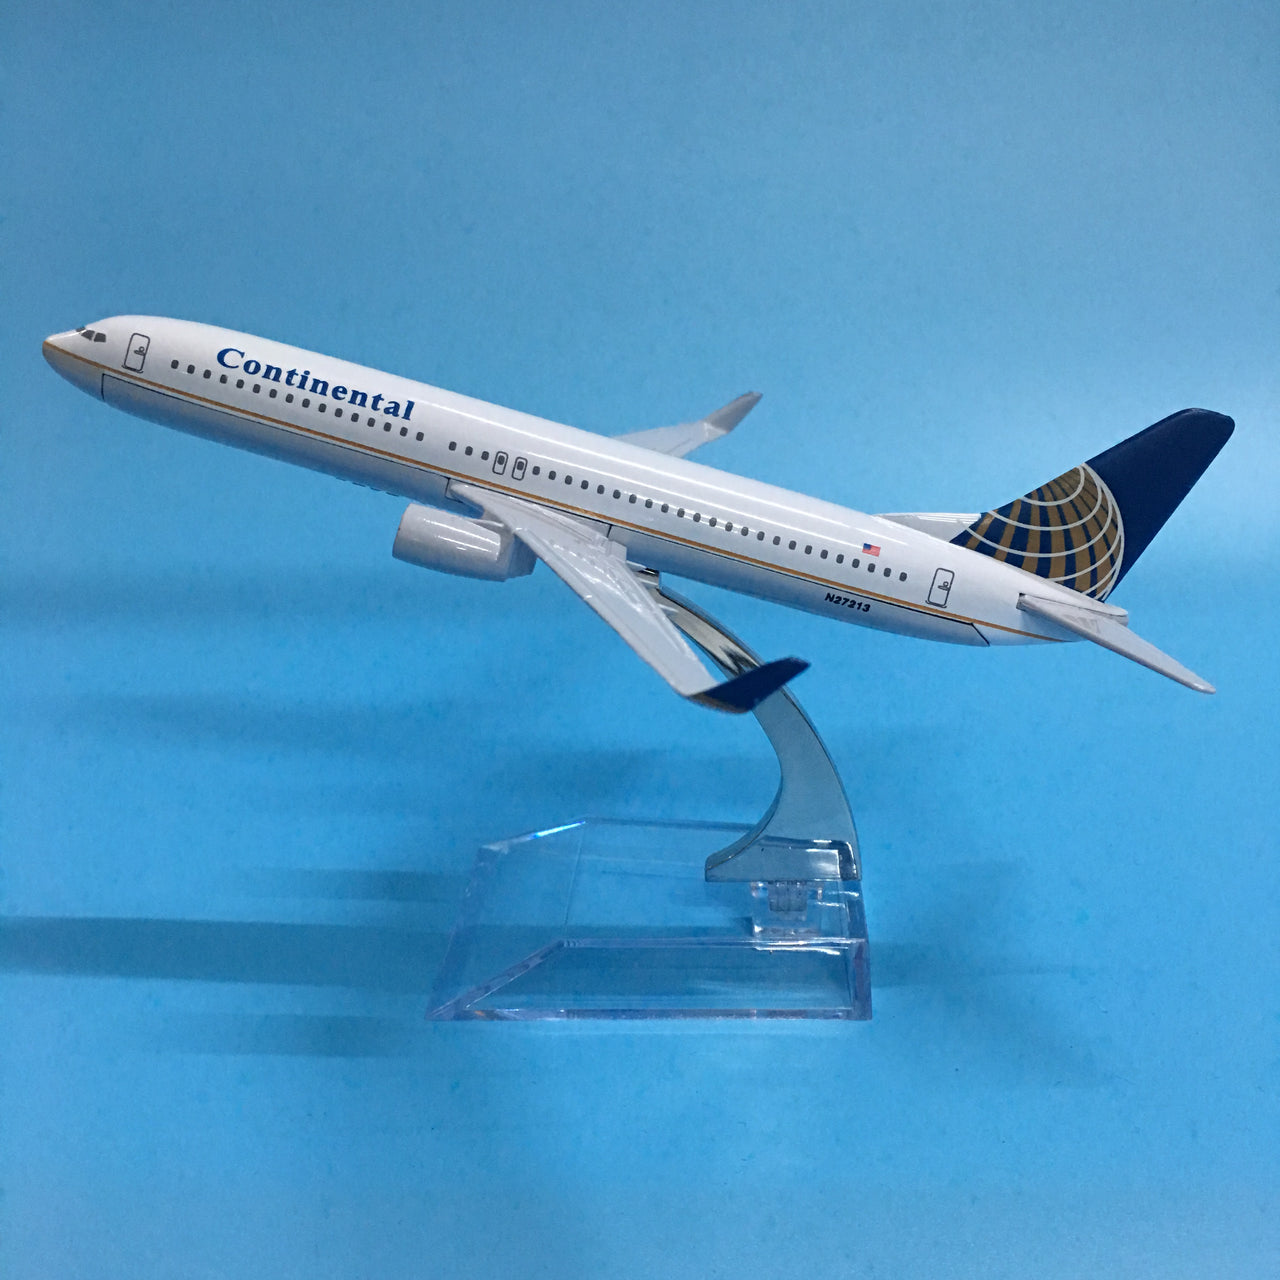 Boeing B737-800 N27213 Continental Airlines Alloy Airbus Juguetes Toy Airplane AV8R